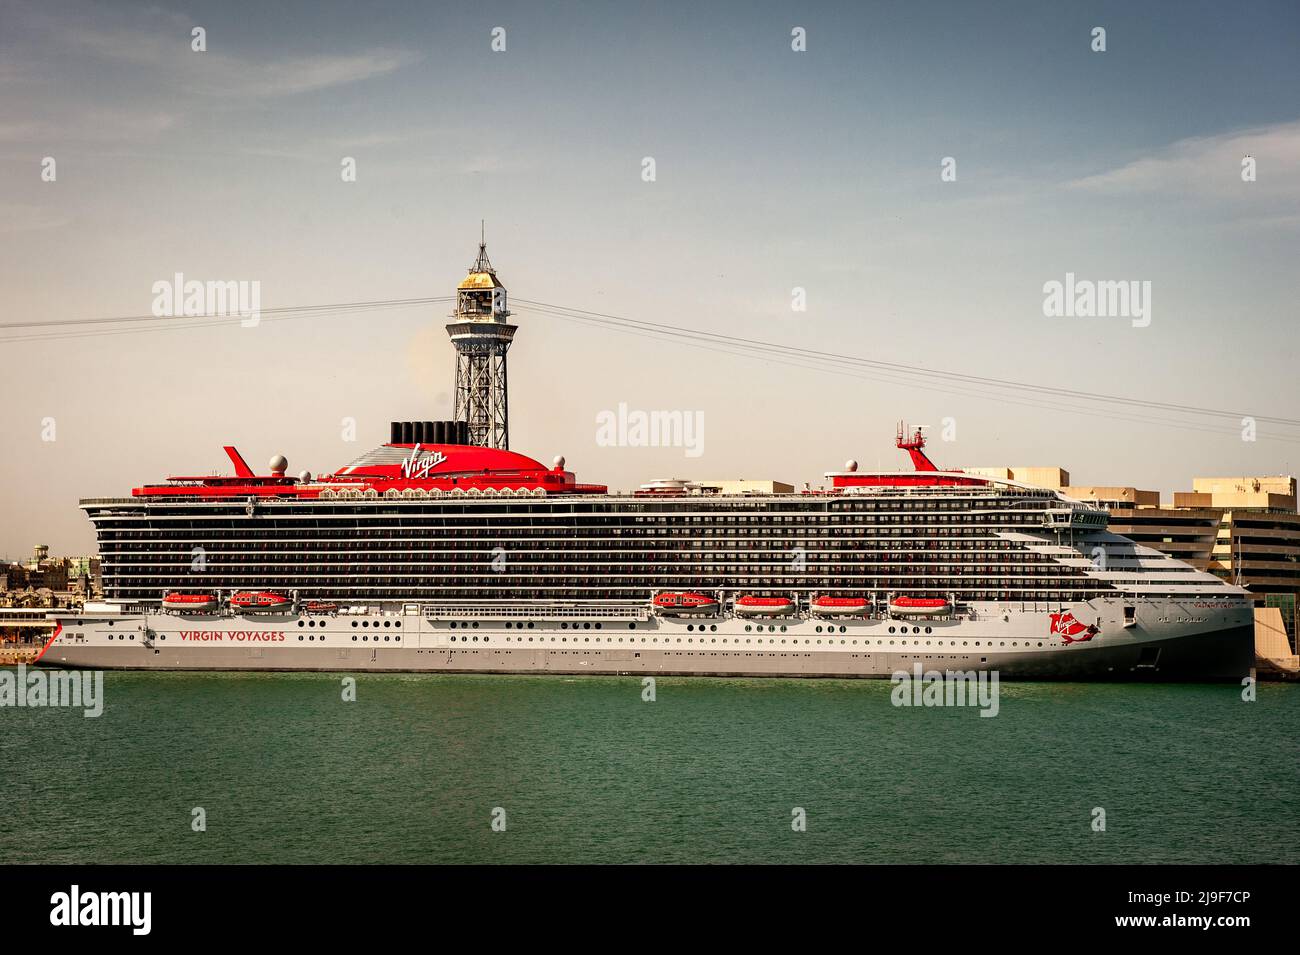 Valiant Lady cruise ship of Virgin Voyages docked in the port of Barcelona. Stock Photo